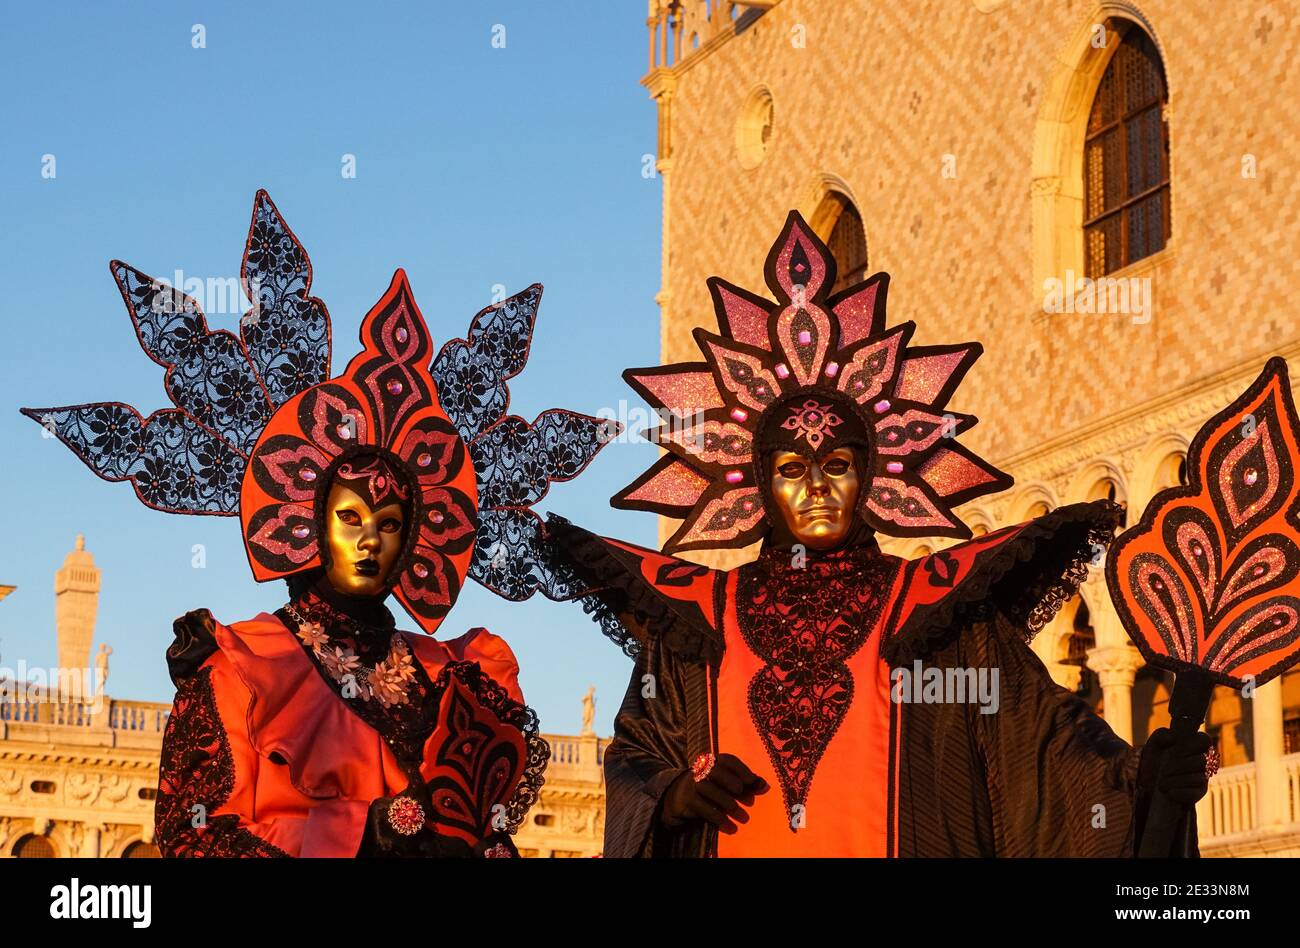 Performers dressed in decorated costumes and masks in front of the Doge's Palace during the Venice Carnival in Venice, Italy Stock Photo